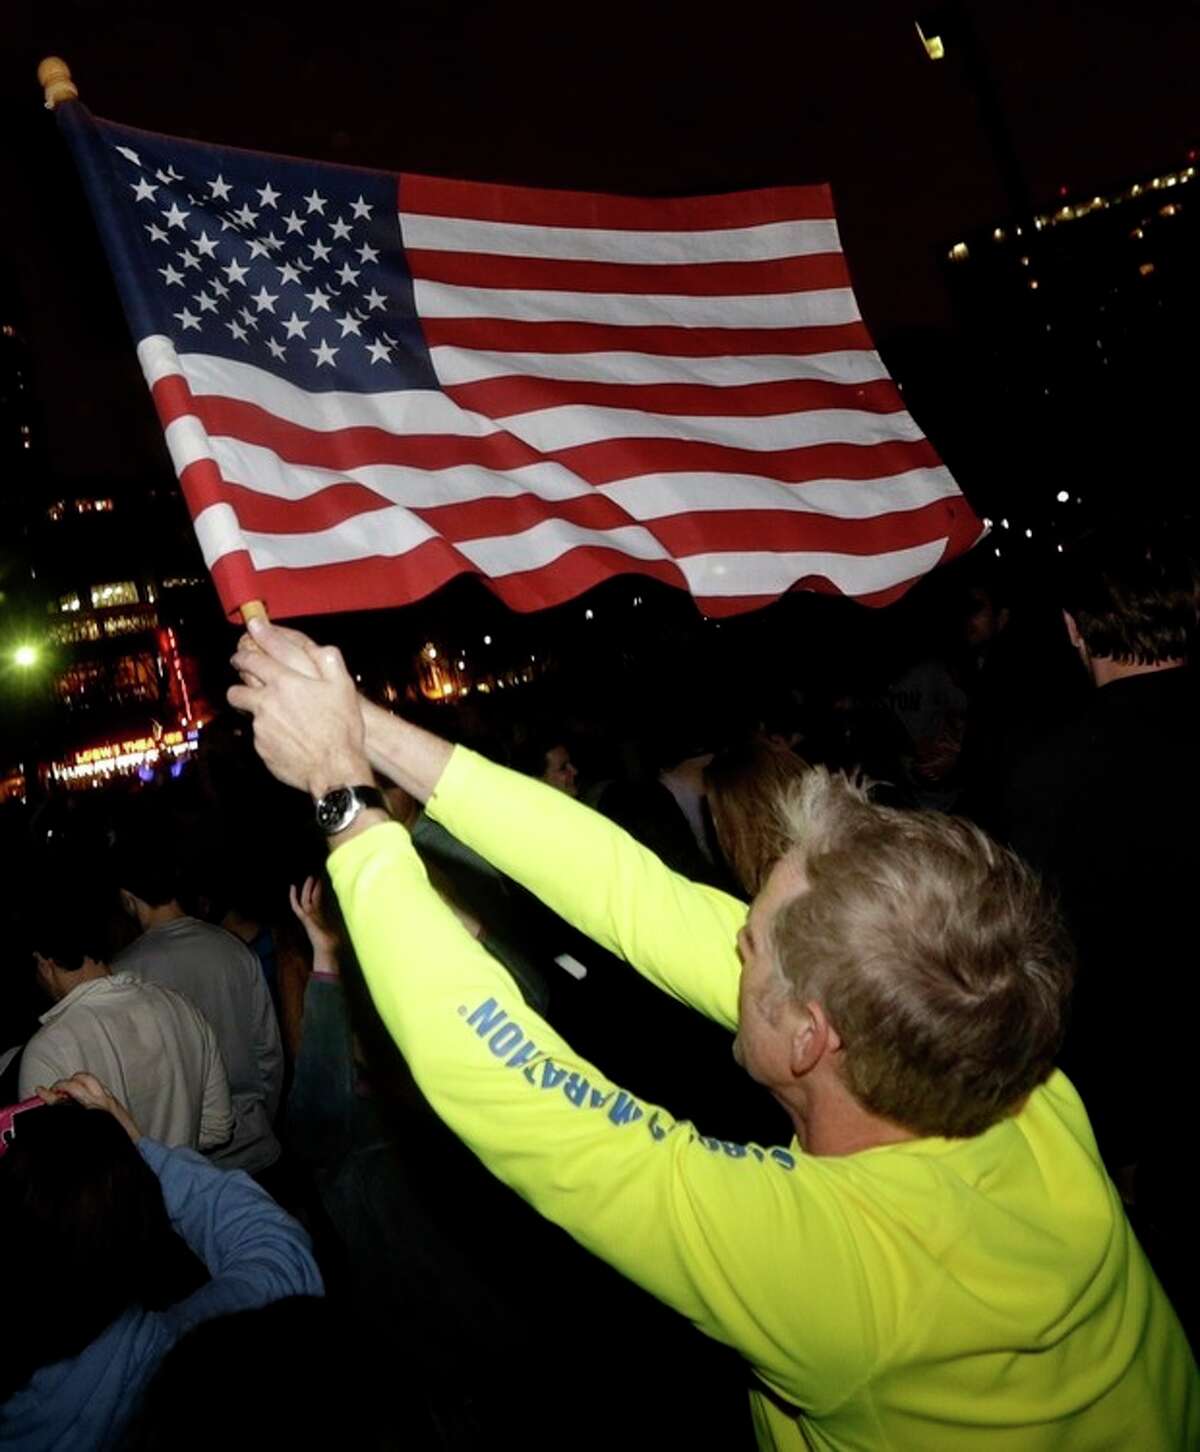 Frank McGillin, who ran three Boston Marathons, waves a U.S. flag as a crowd reacts to news of the arrest of one of the Boston Marathon bombing suspects during a celebration at Boston Common, Friday, April 19, 2013, in Boston. Boston Marathon bombing suspect Dzhokhar Tsarnaev was captured in Watertown, Mass. The 19-year-old college student wanted in the bombings was taken into custody Friday evening after a manhunt that left the city virtually paralyzed and his older brother and accomplice dead. (AP Photo/Julio Cortez)